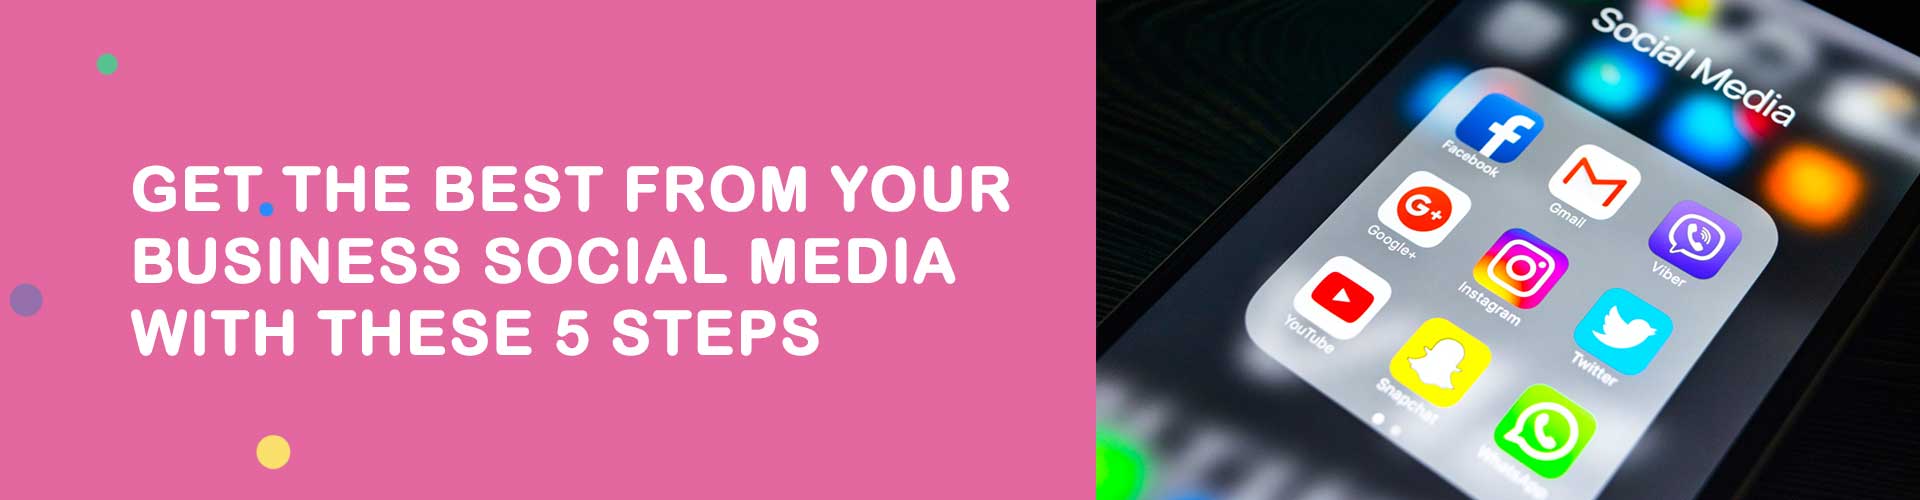 Get The Best From Your Business Social Media With These 5 Steps